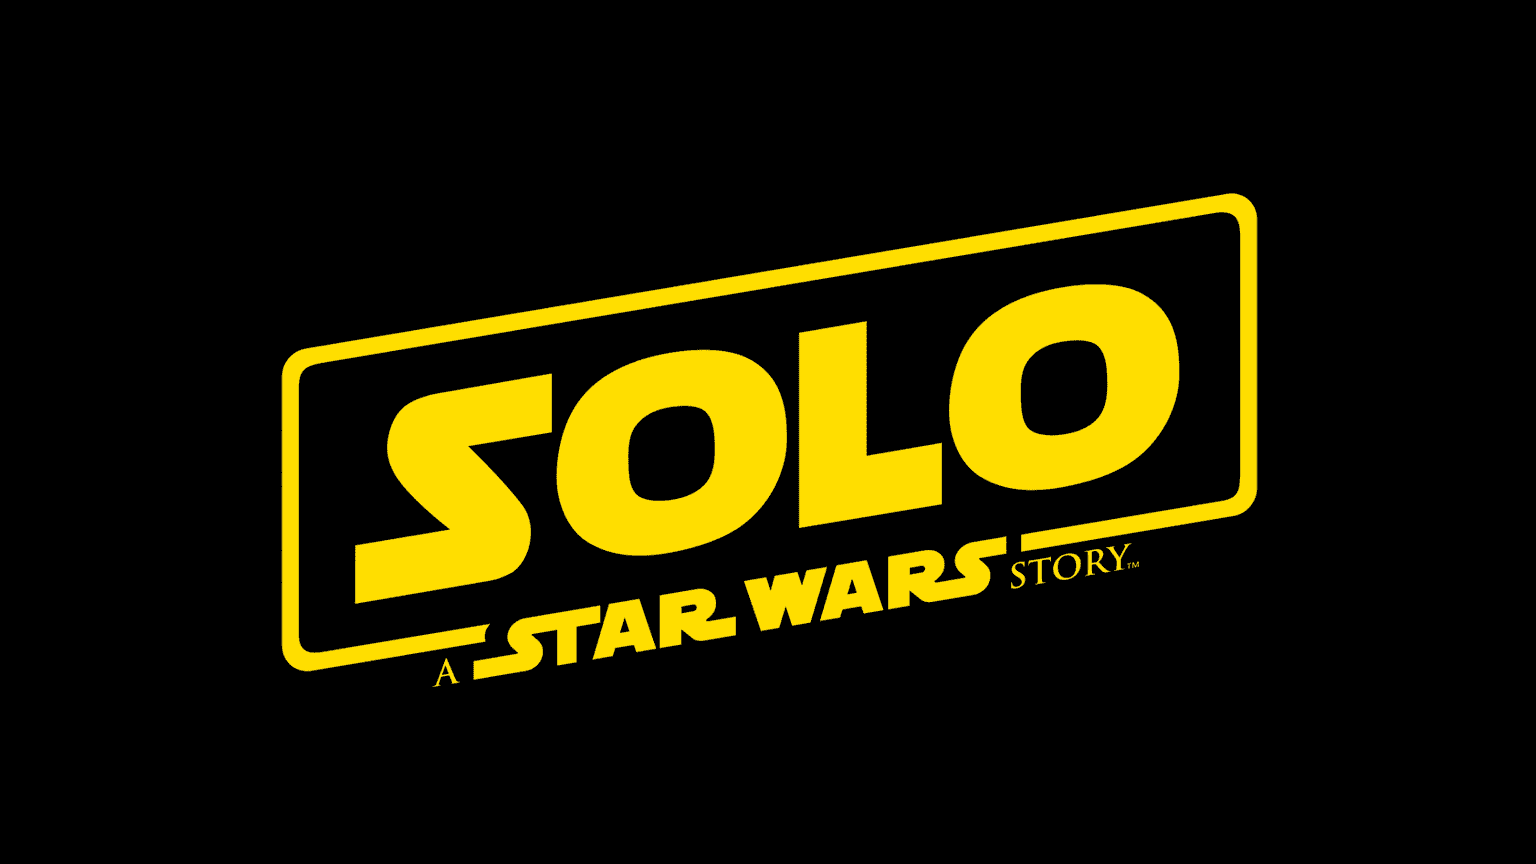 Name of new Star Wars Story film is revealed as Solo: A Star Wars Story - no surprise there then!